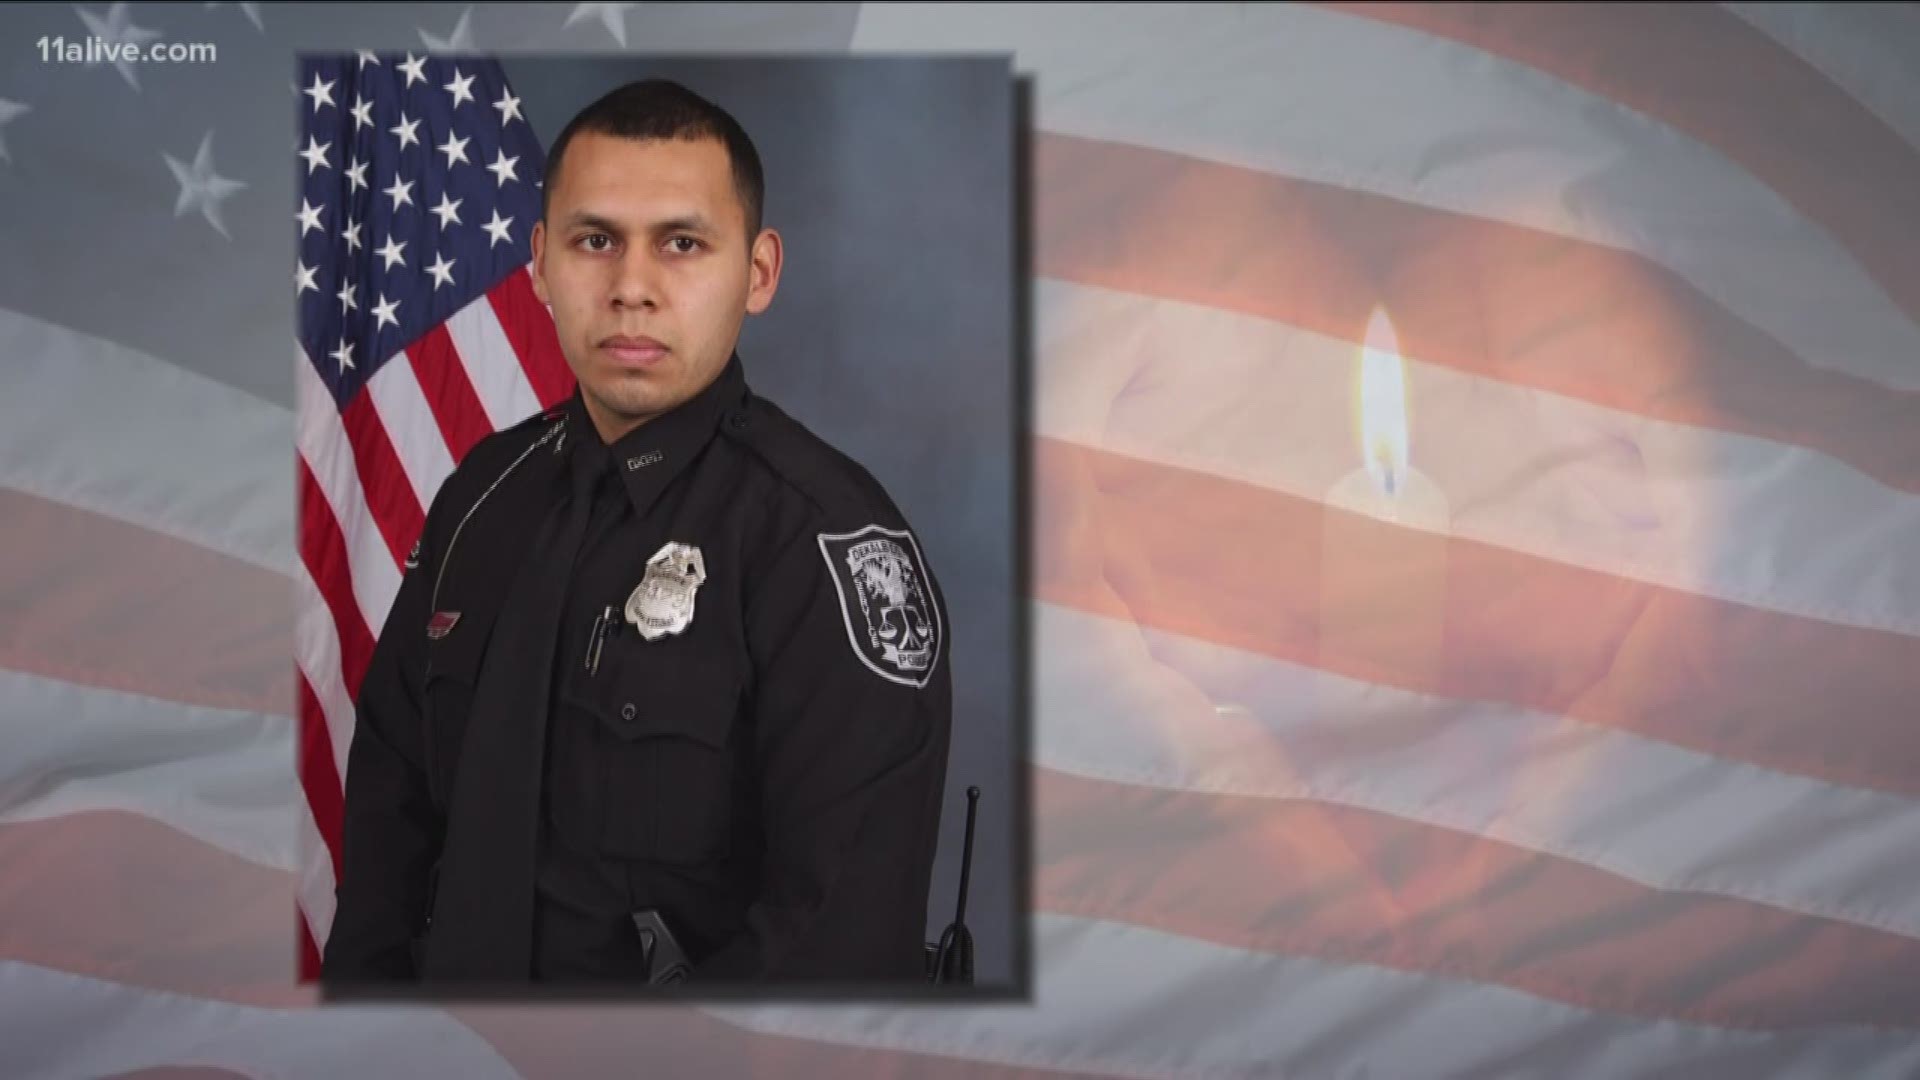 Edgar Flores was killed in the line of duty.